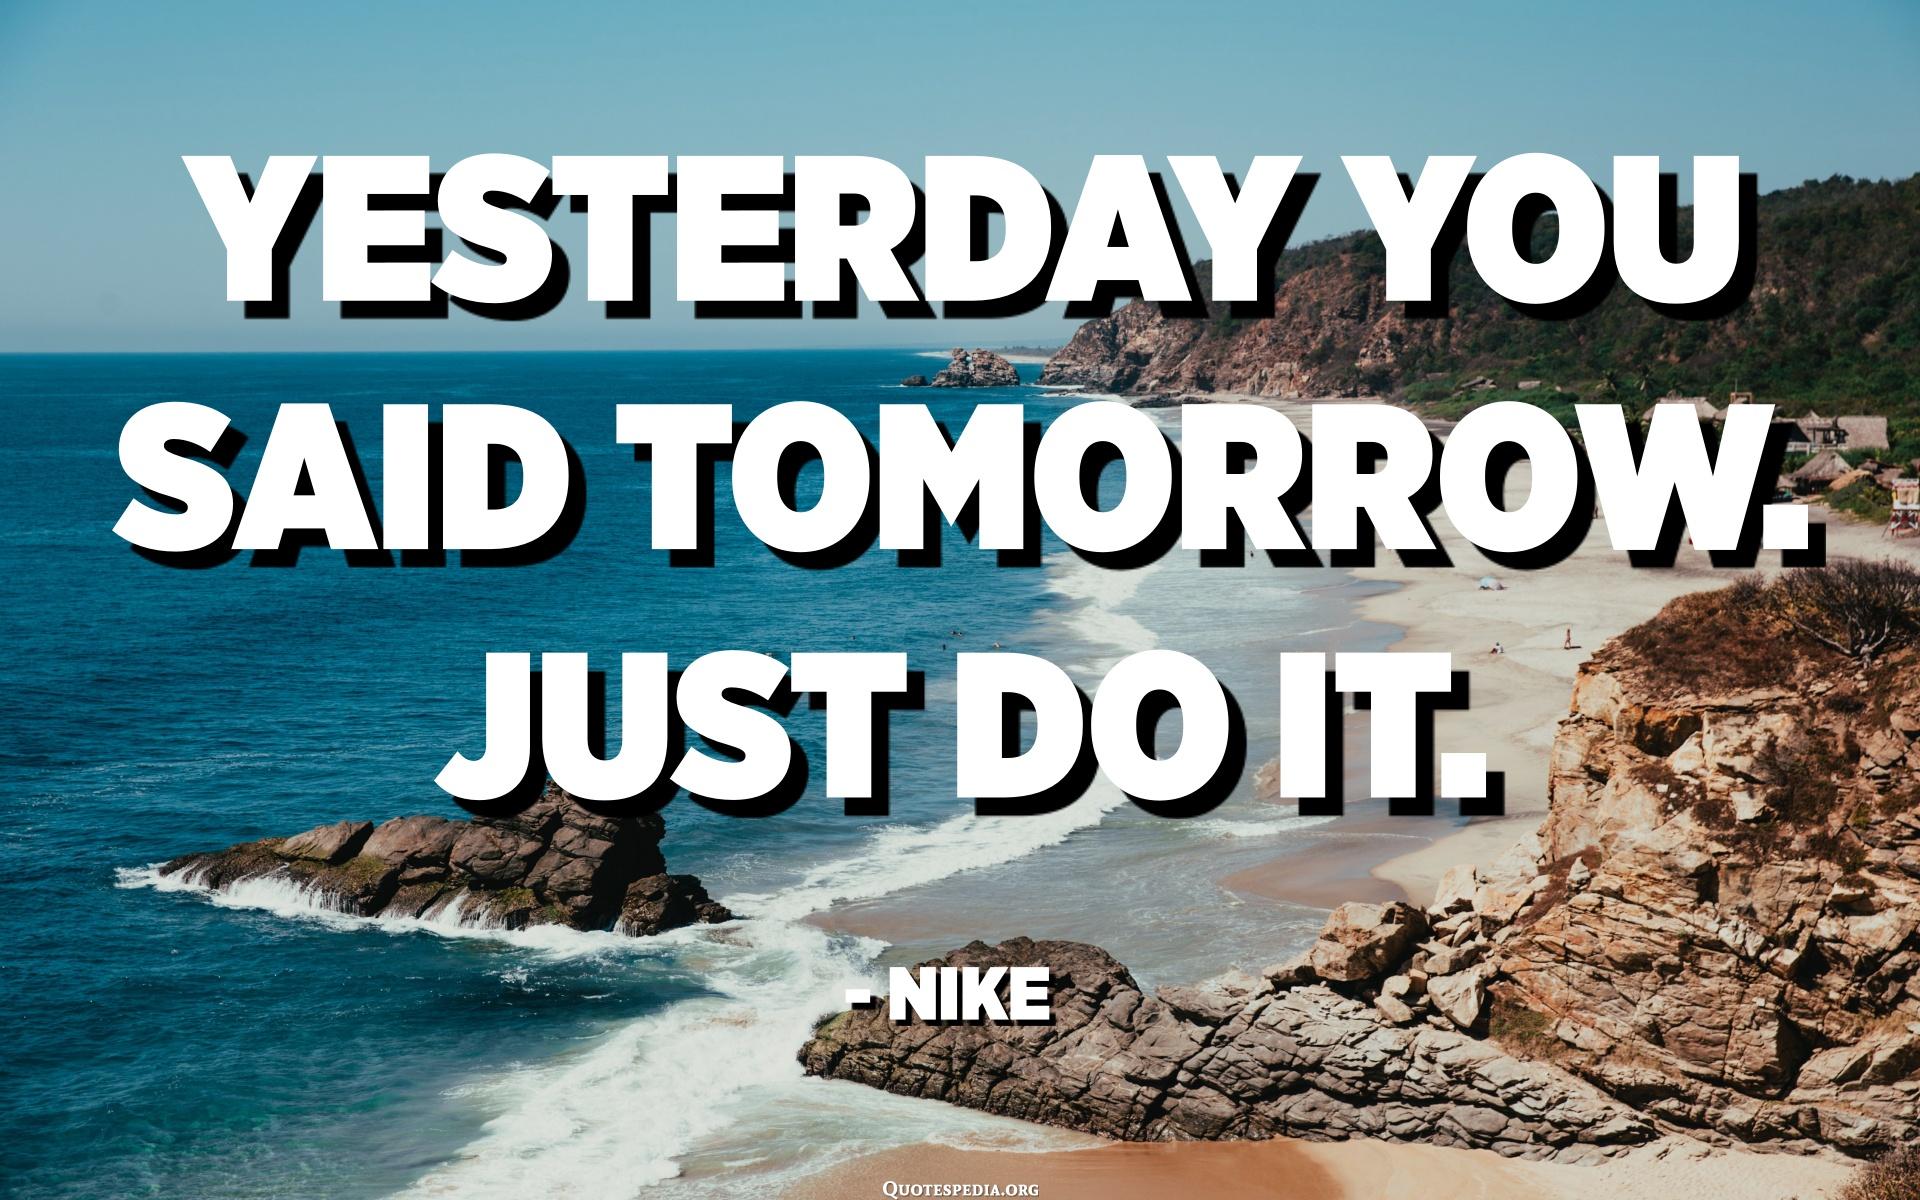 Yesterday you said tomorrow. Just do it